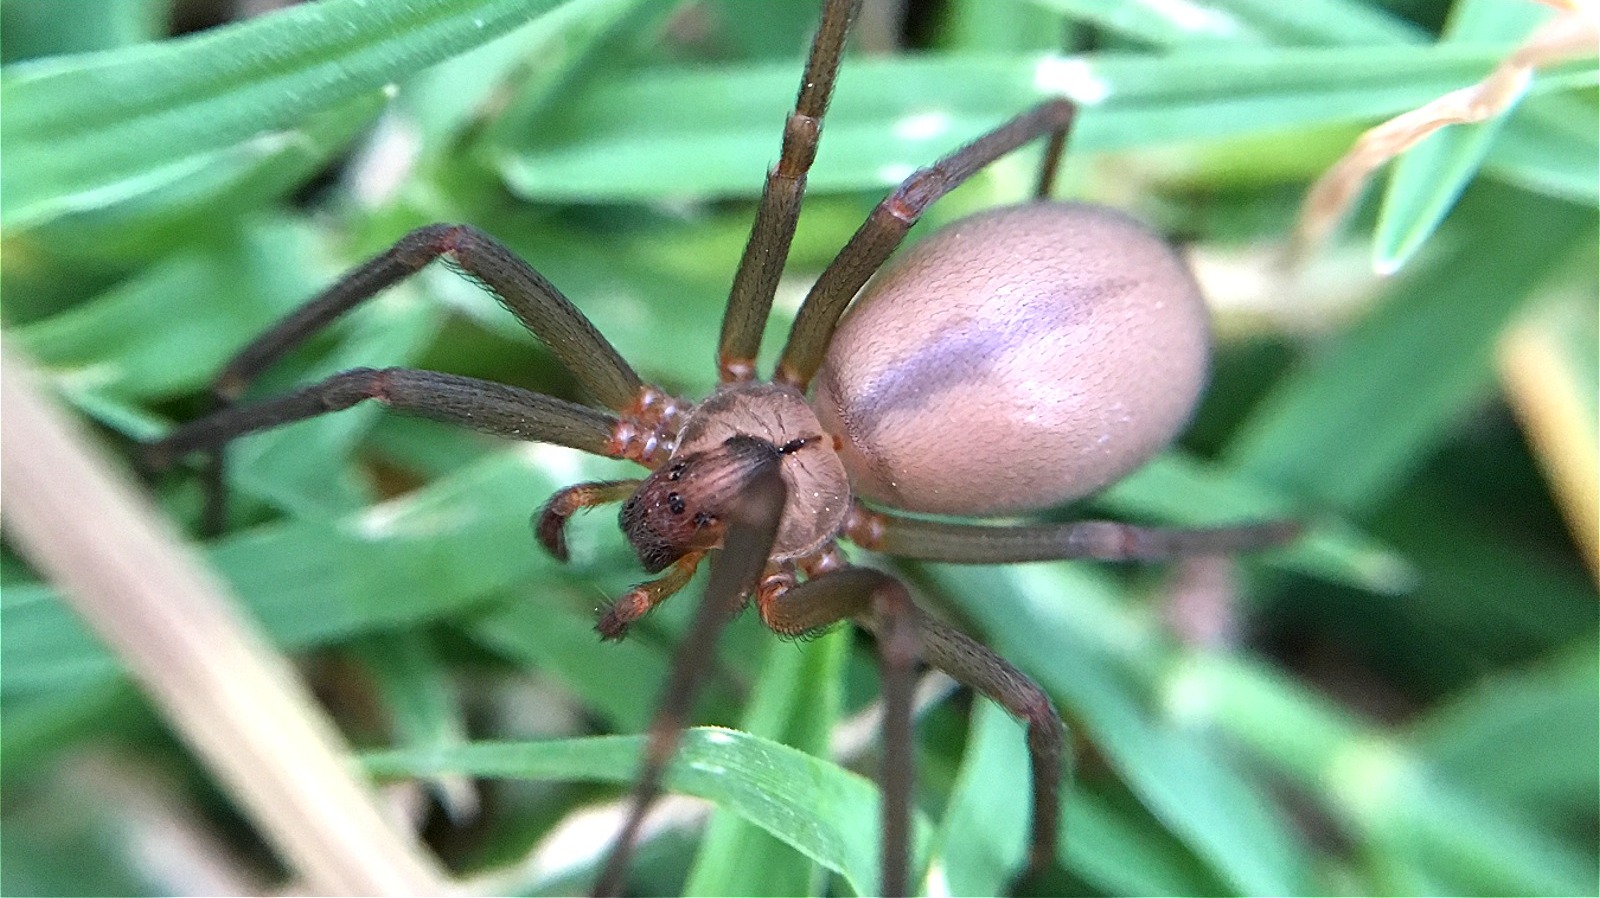 Your Lawn May Be Attracting Brown Recluse Spiders. Here's How